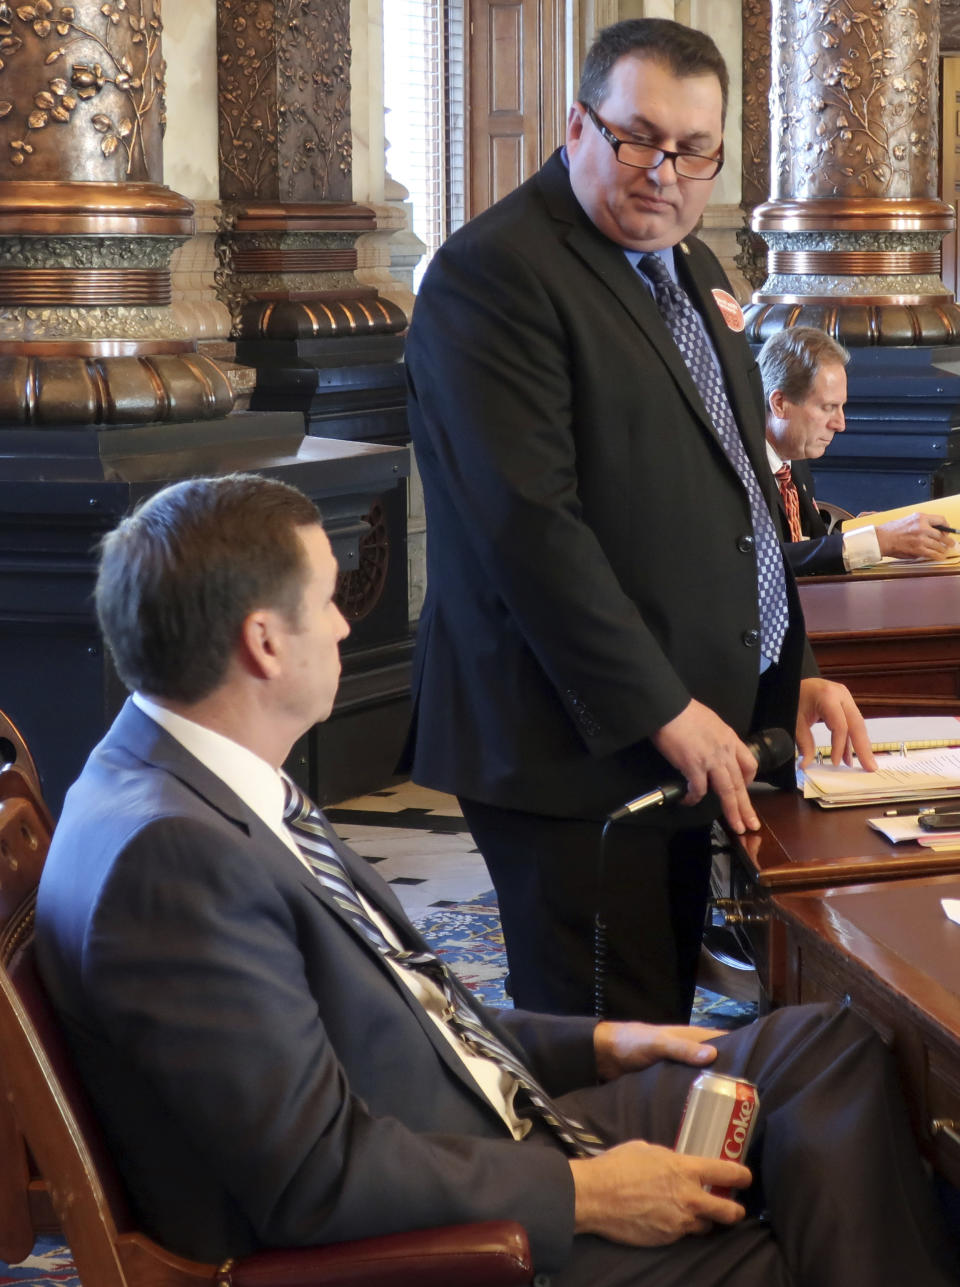 In this Wednesday, Feb. 20, 2019 photo, Kansas state Sen. Rob Olson, right, R-Olathe, confers with Sen. Dennis Pyle, left, R-Hiawatha, during a debate on a bill allowing the Kansas Farm Bureau to offer health coverage to its members, at the Statehouse in Topeka, Kan. Olson is chairman of a committee that endorsed the bill and Pyle supports it. (AP Photo/John Hanna)